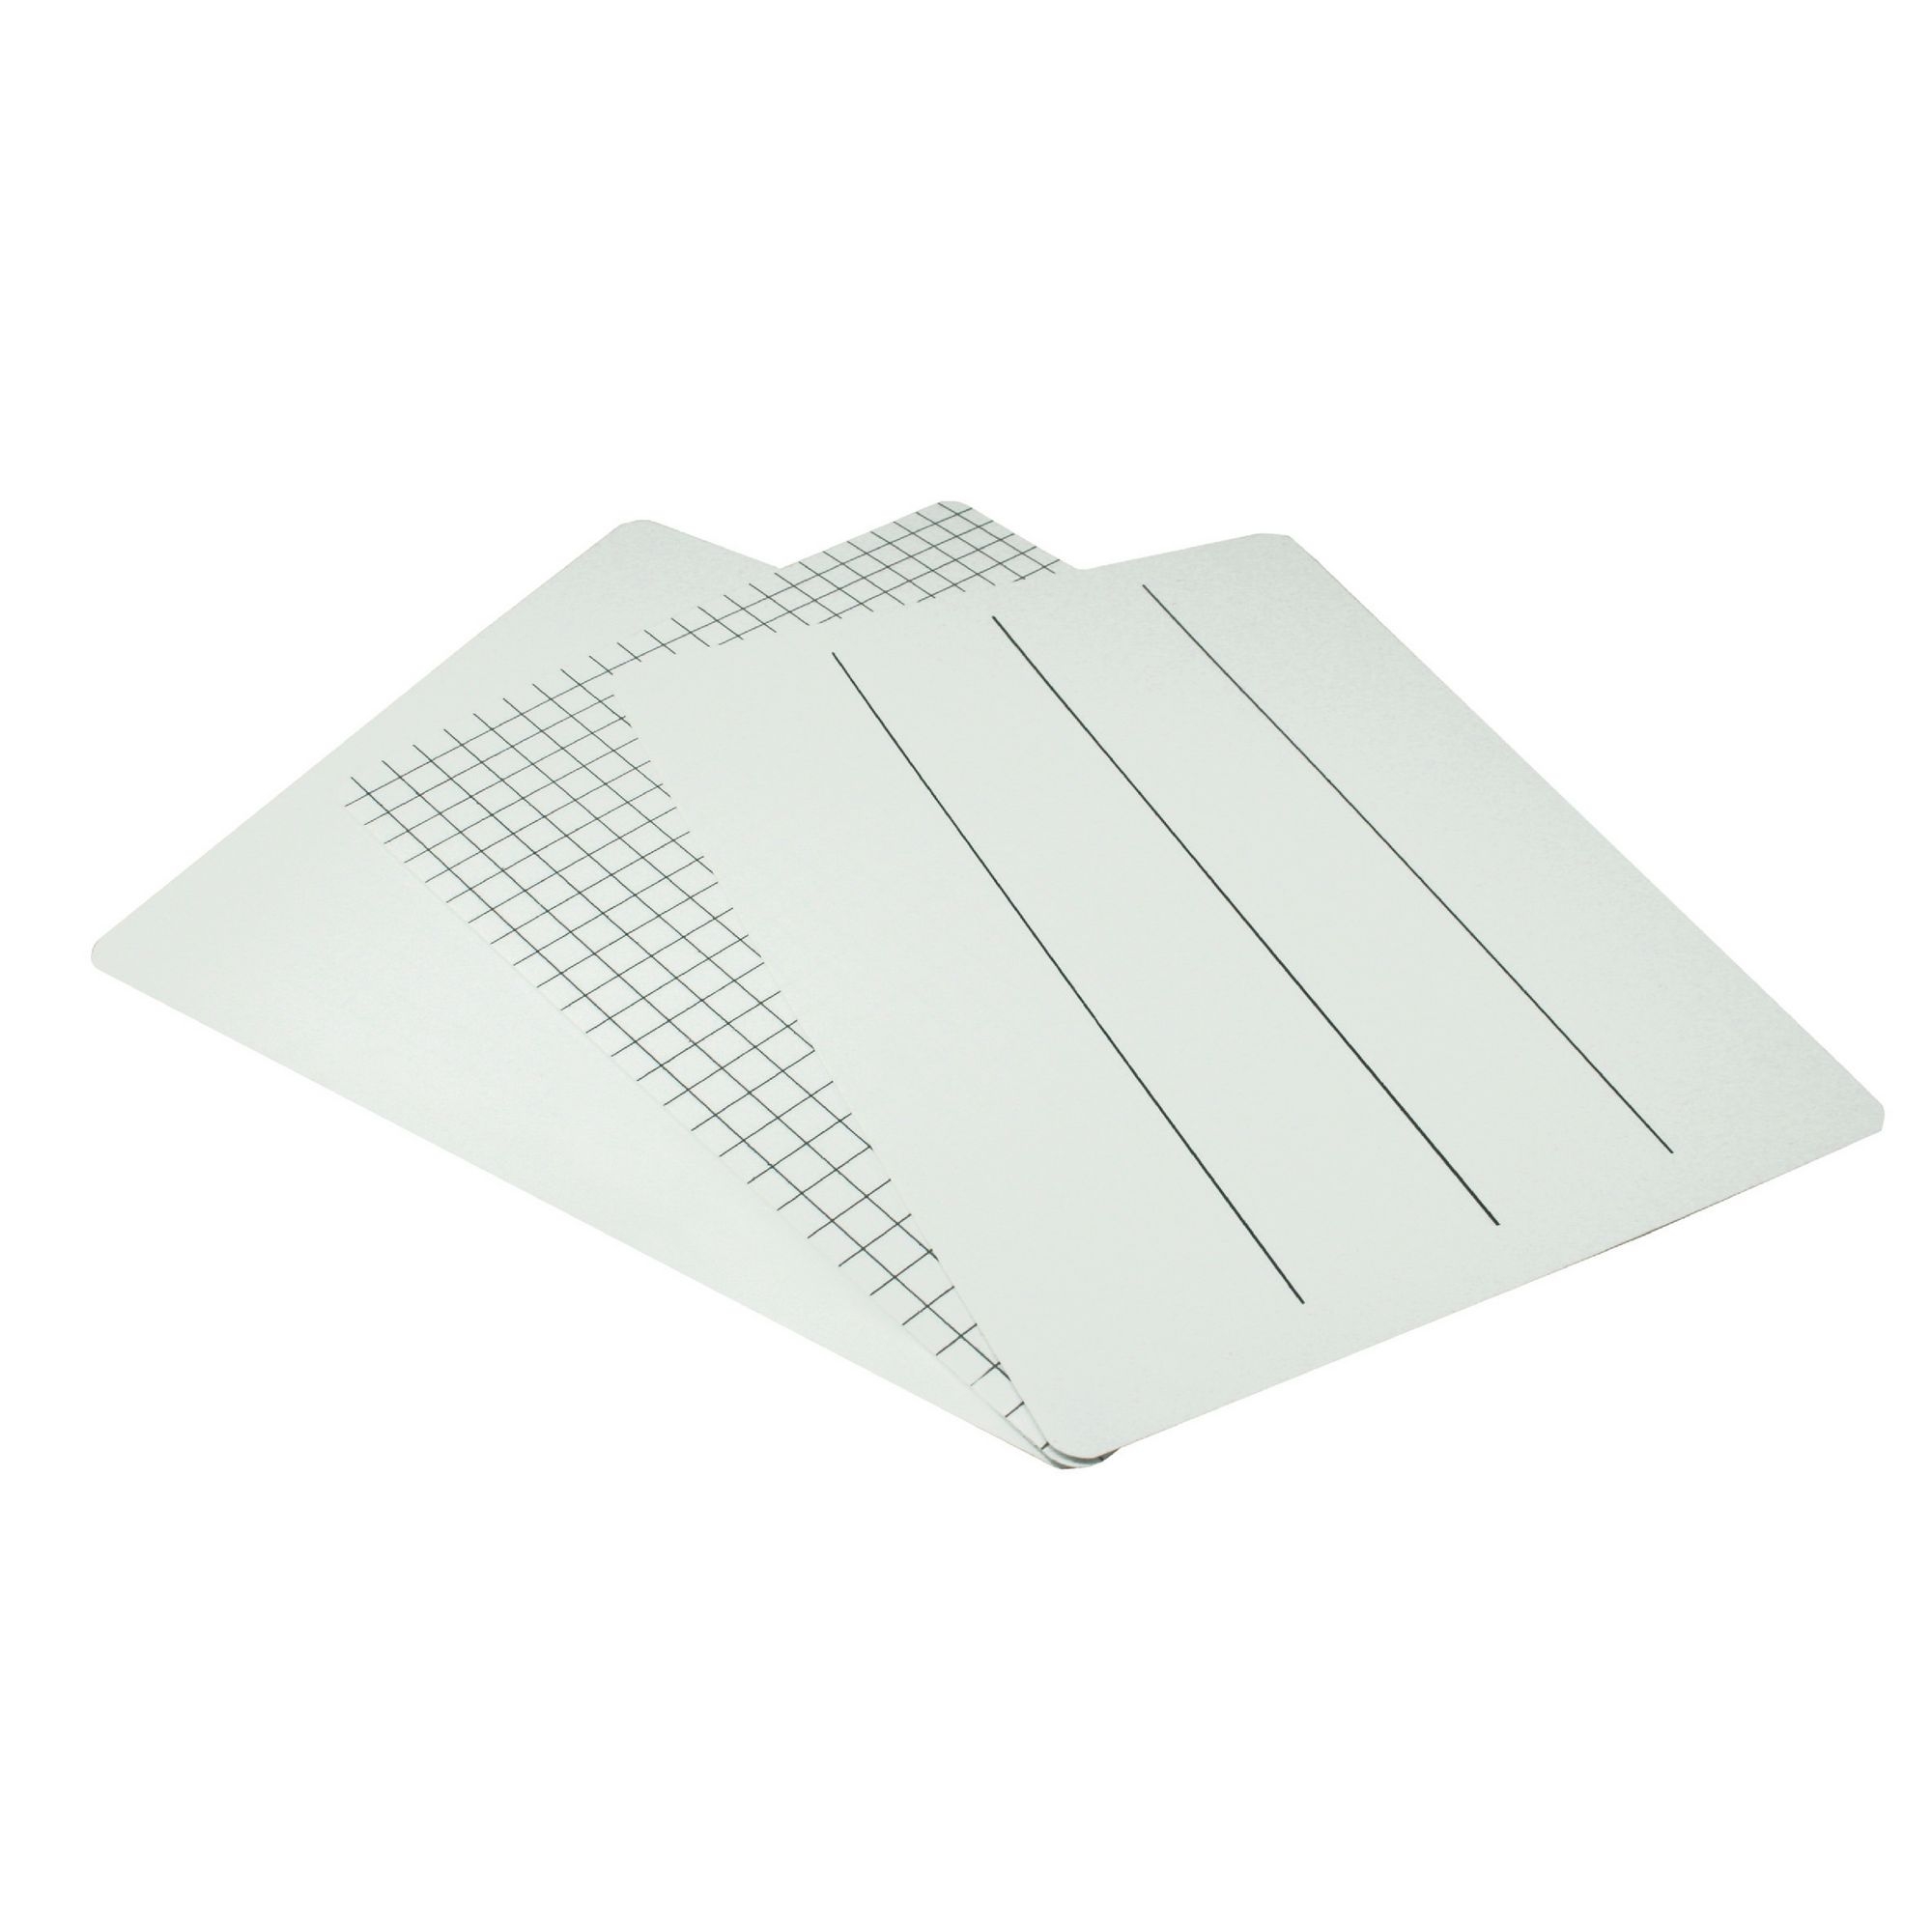 Classmates Lightweight Whiteboards - Non-magnetic - A4 Lined - Pack 10